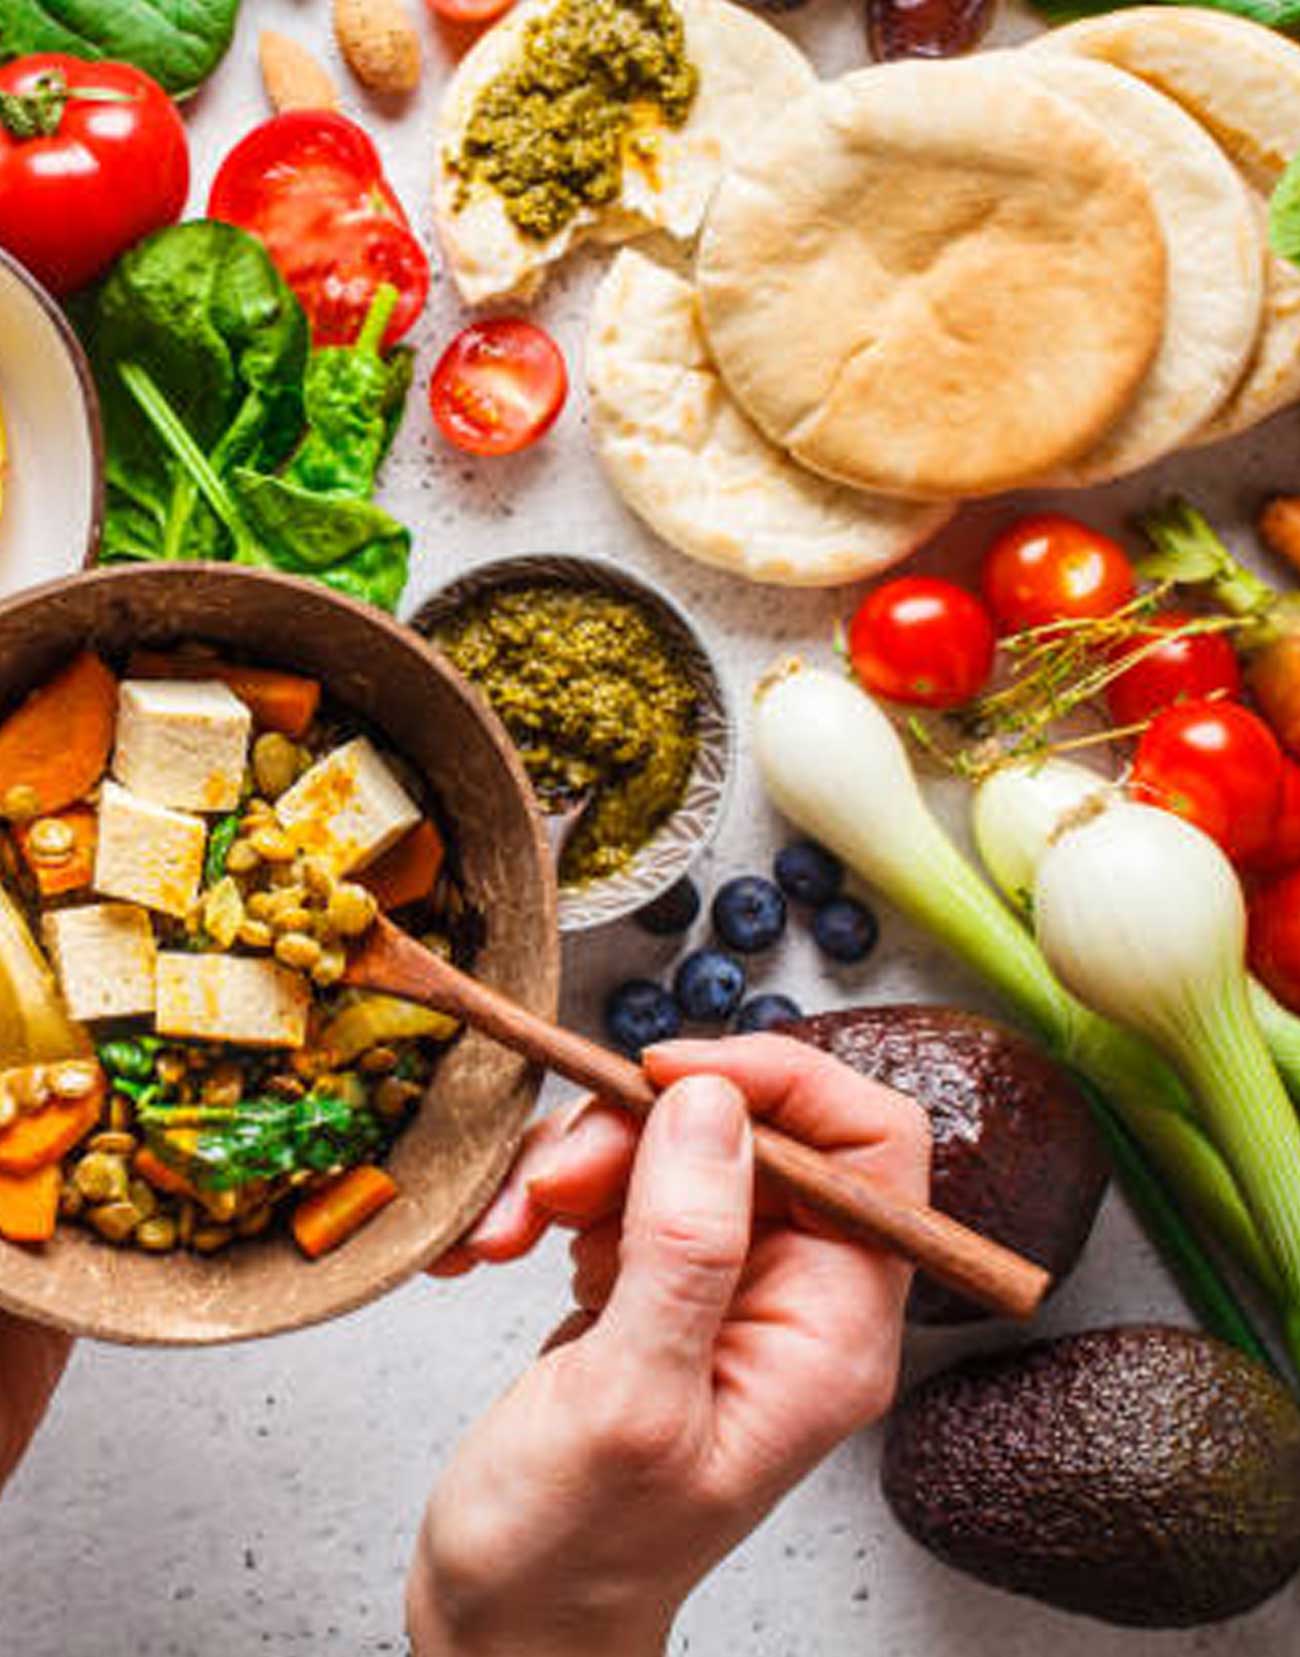 The Ultimate Guide to Losing Weight with a Plant-Based Diet